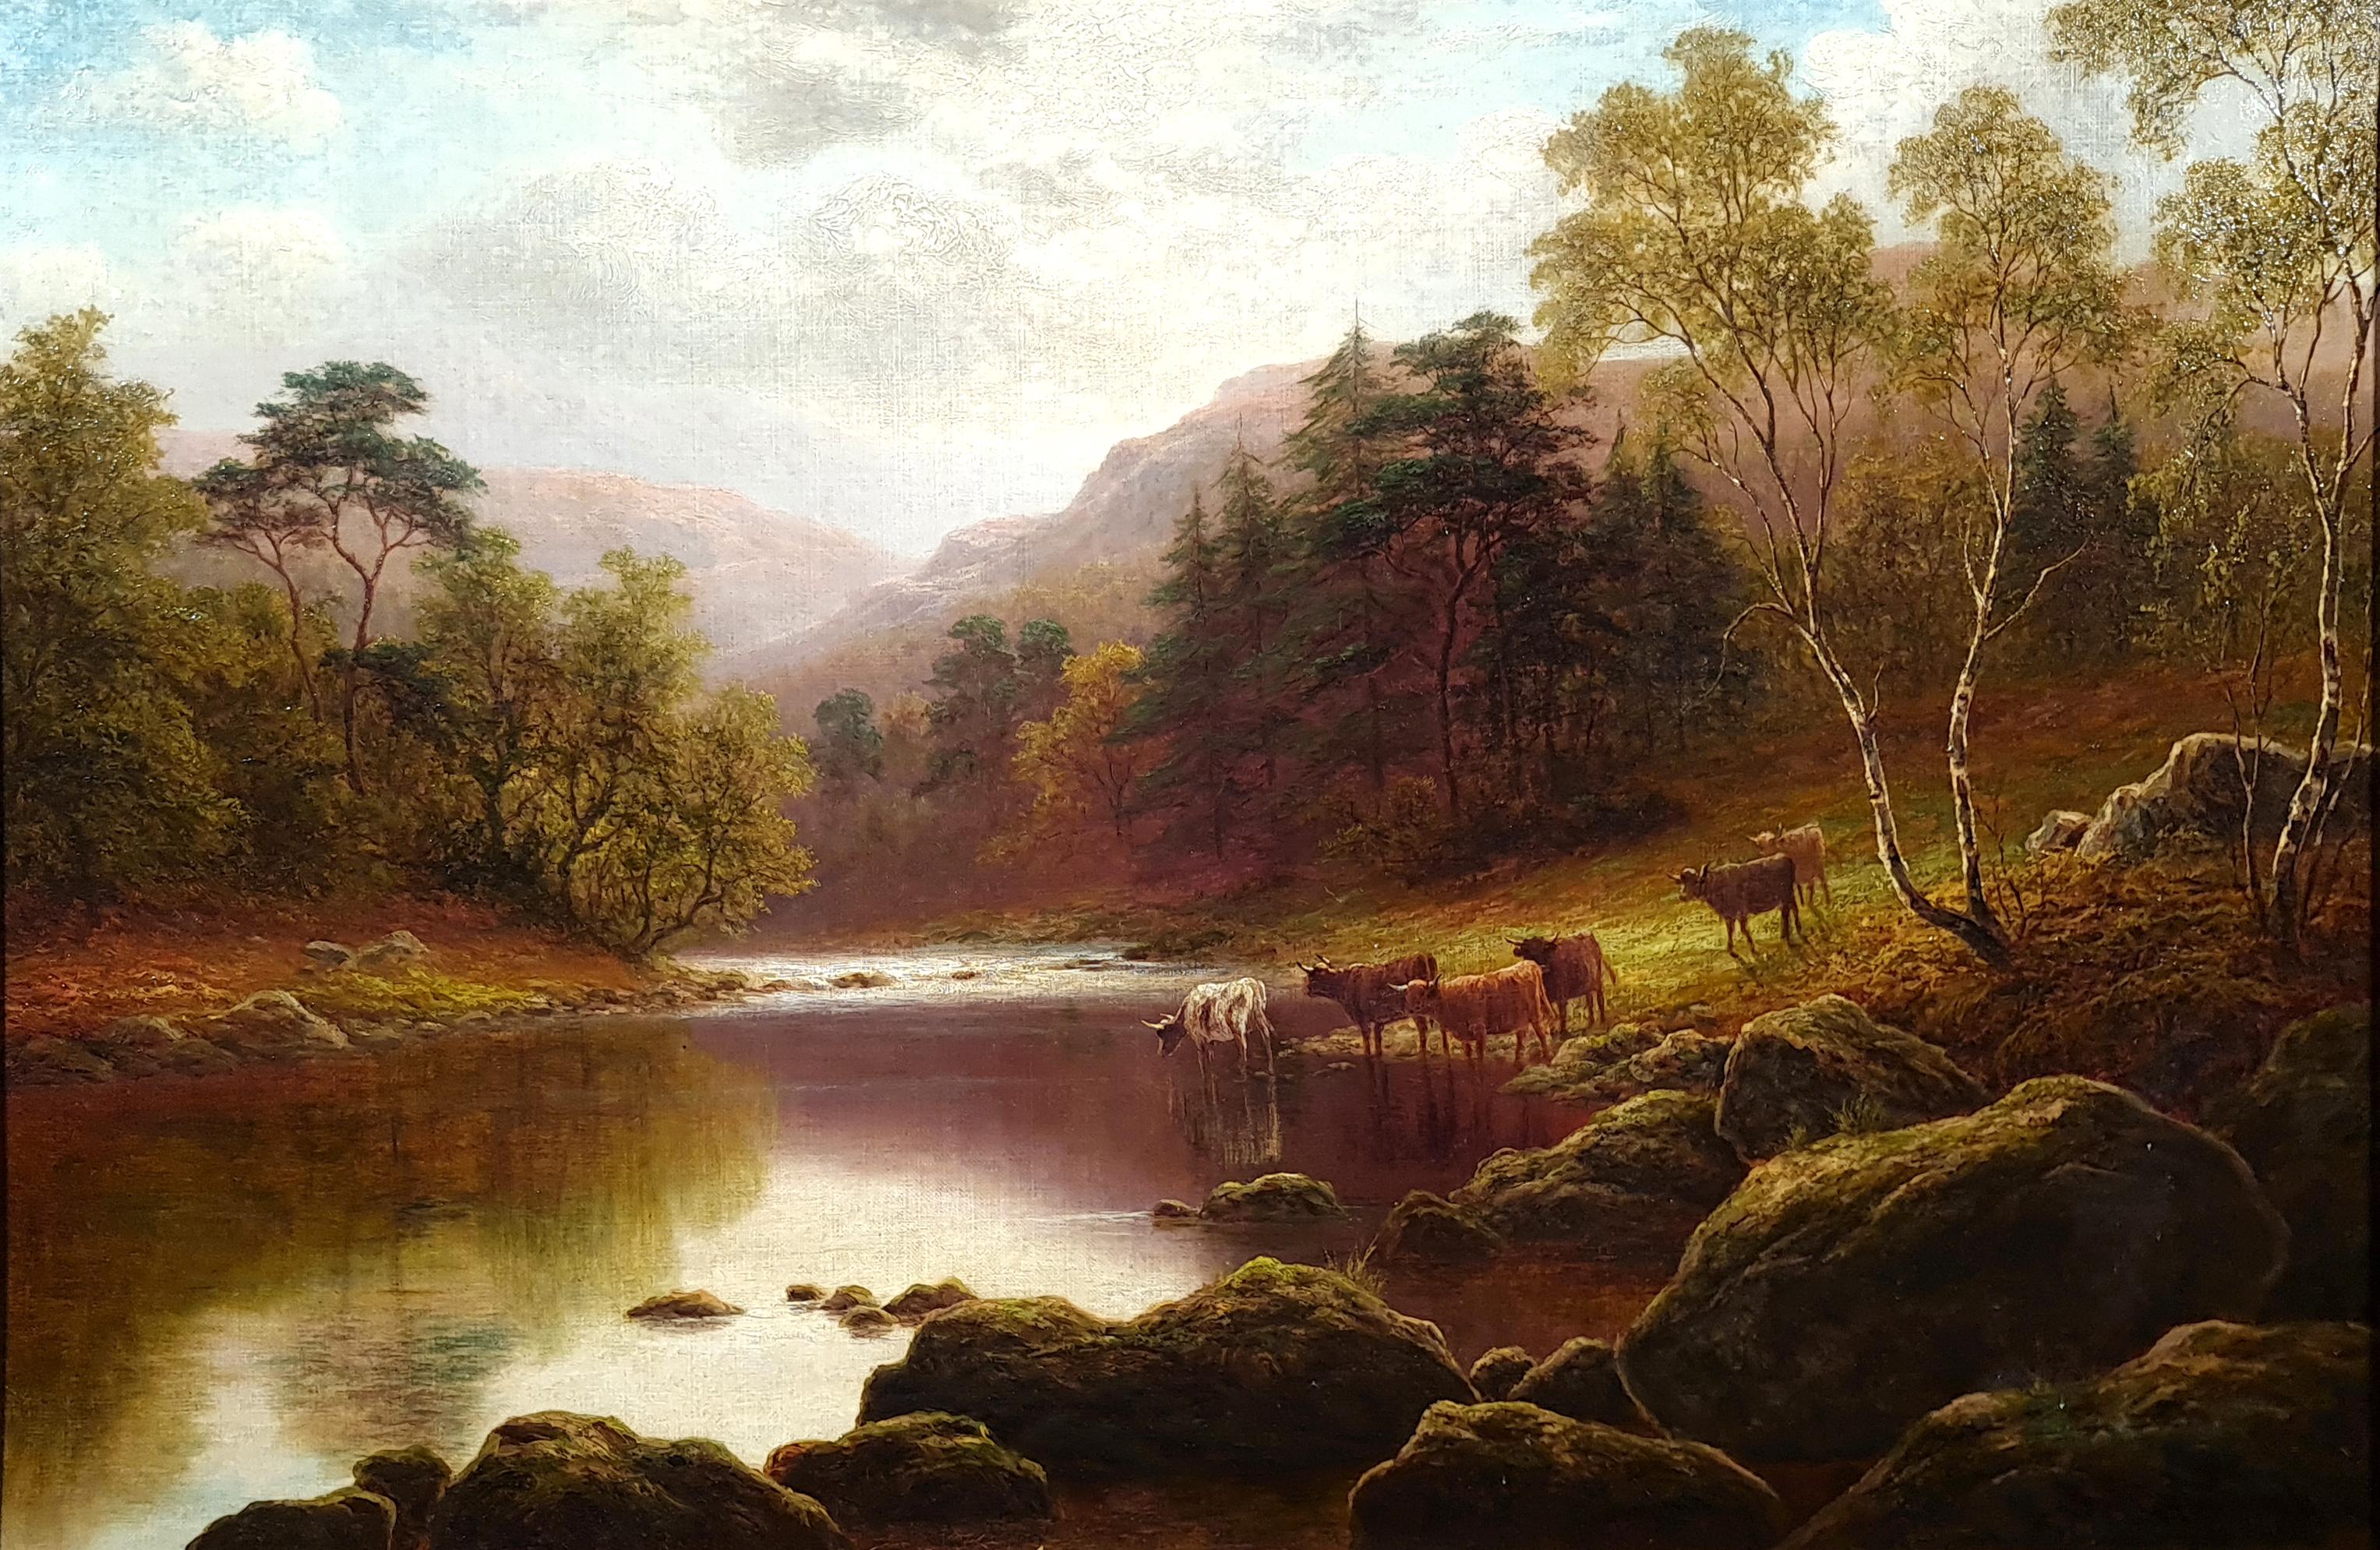 On The Glaslyn, Nordwales, Nordwales – Painting von William Mellor